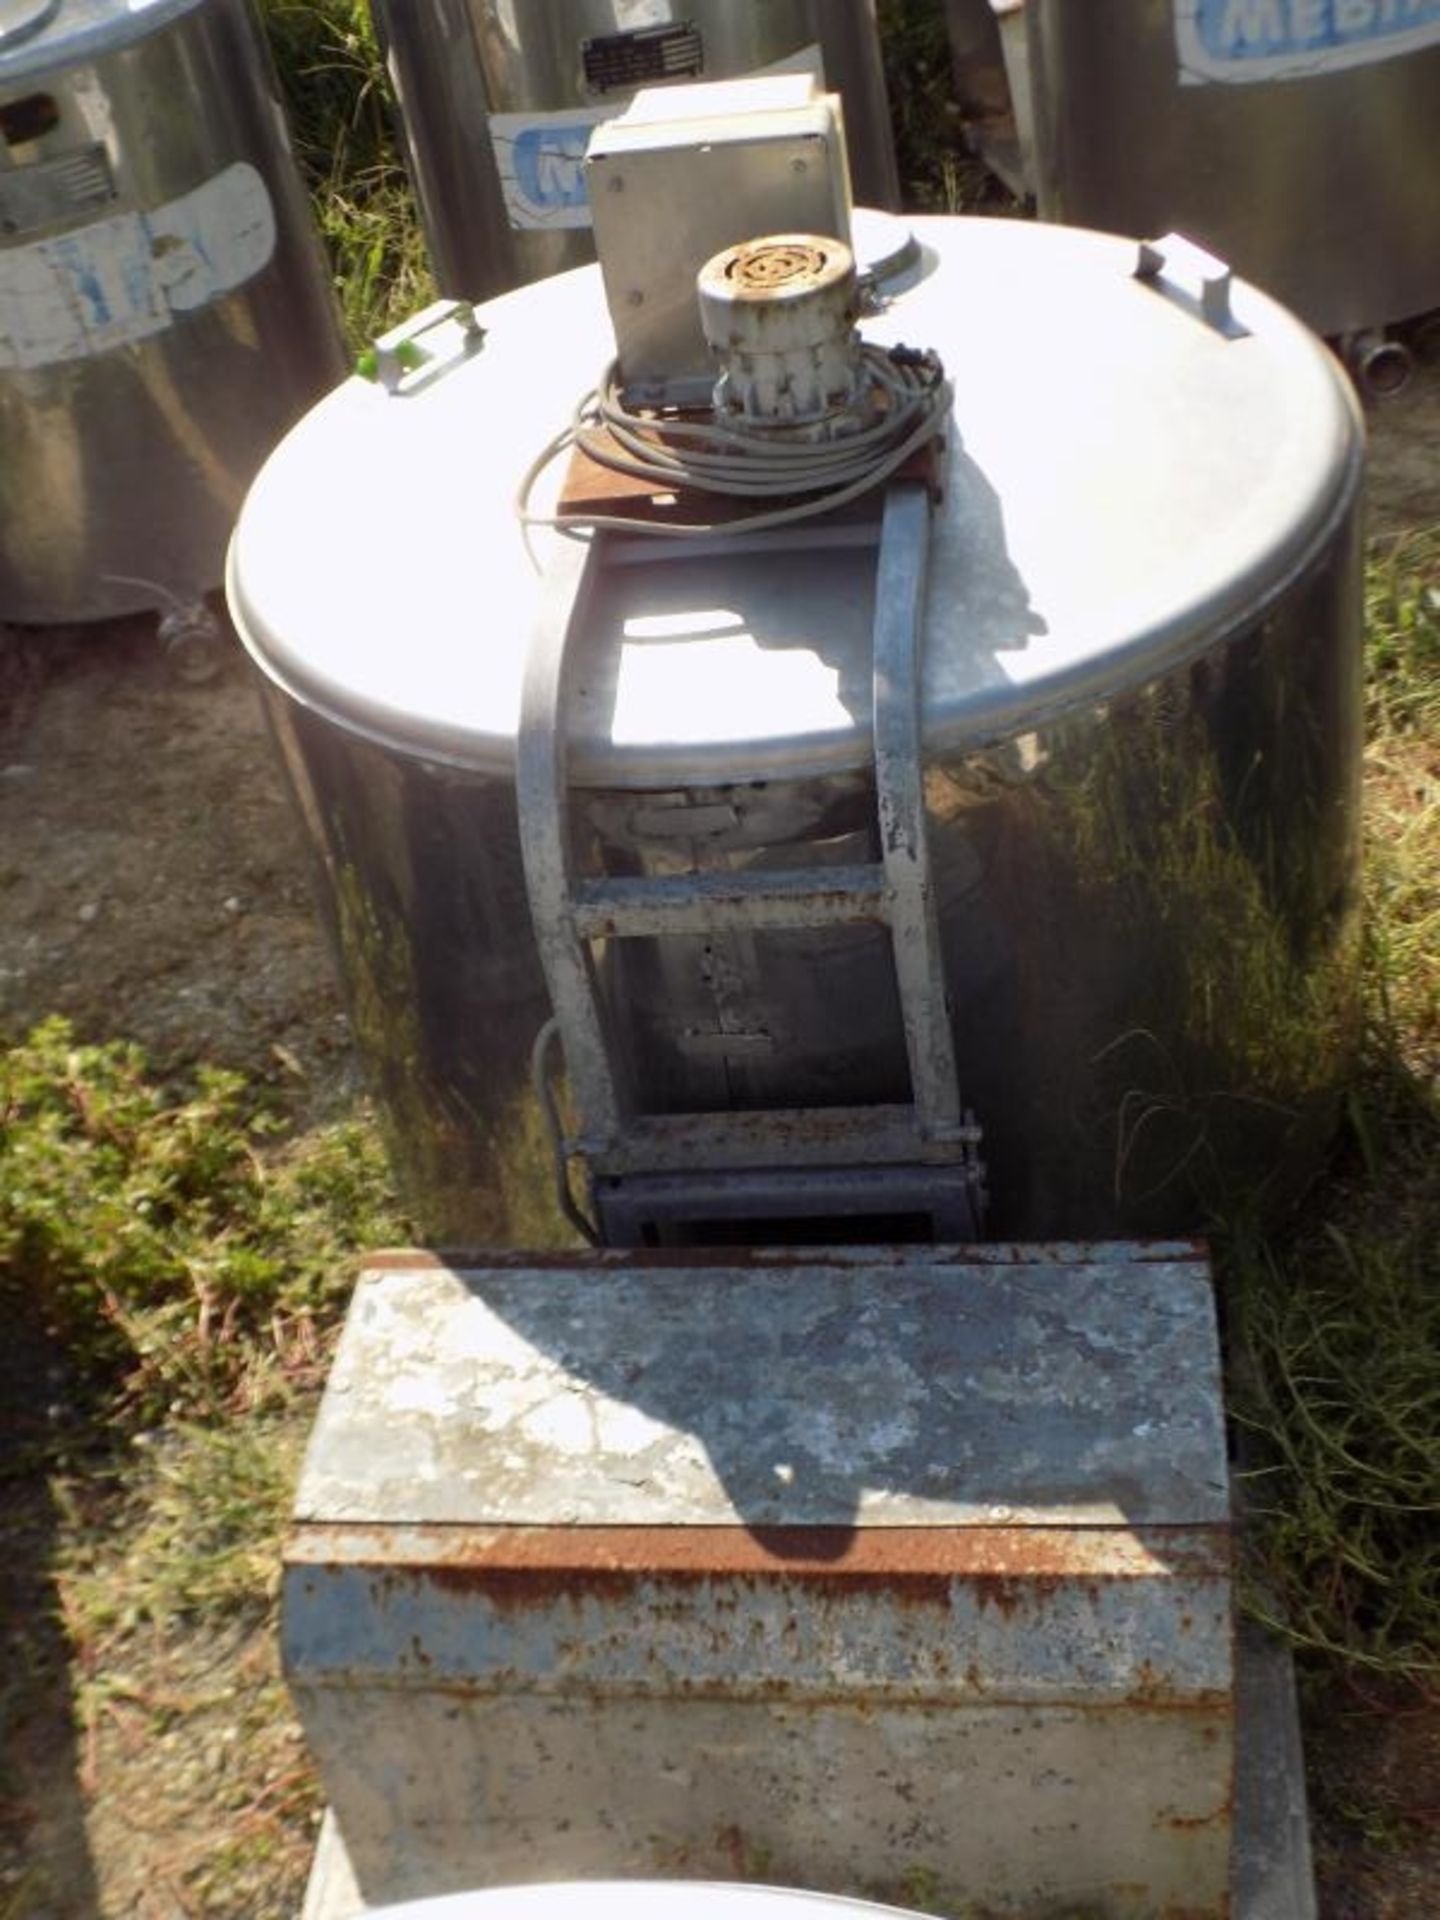 Japy Aprox. 320 L/85 Gal. Jacketed S/S Farm Tank with Hinged Lid, Twin Blade Prop, Motor with - Image 3 of 3